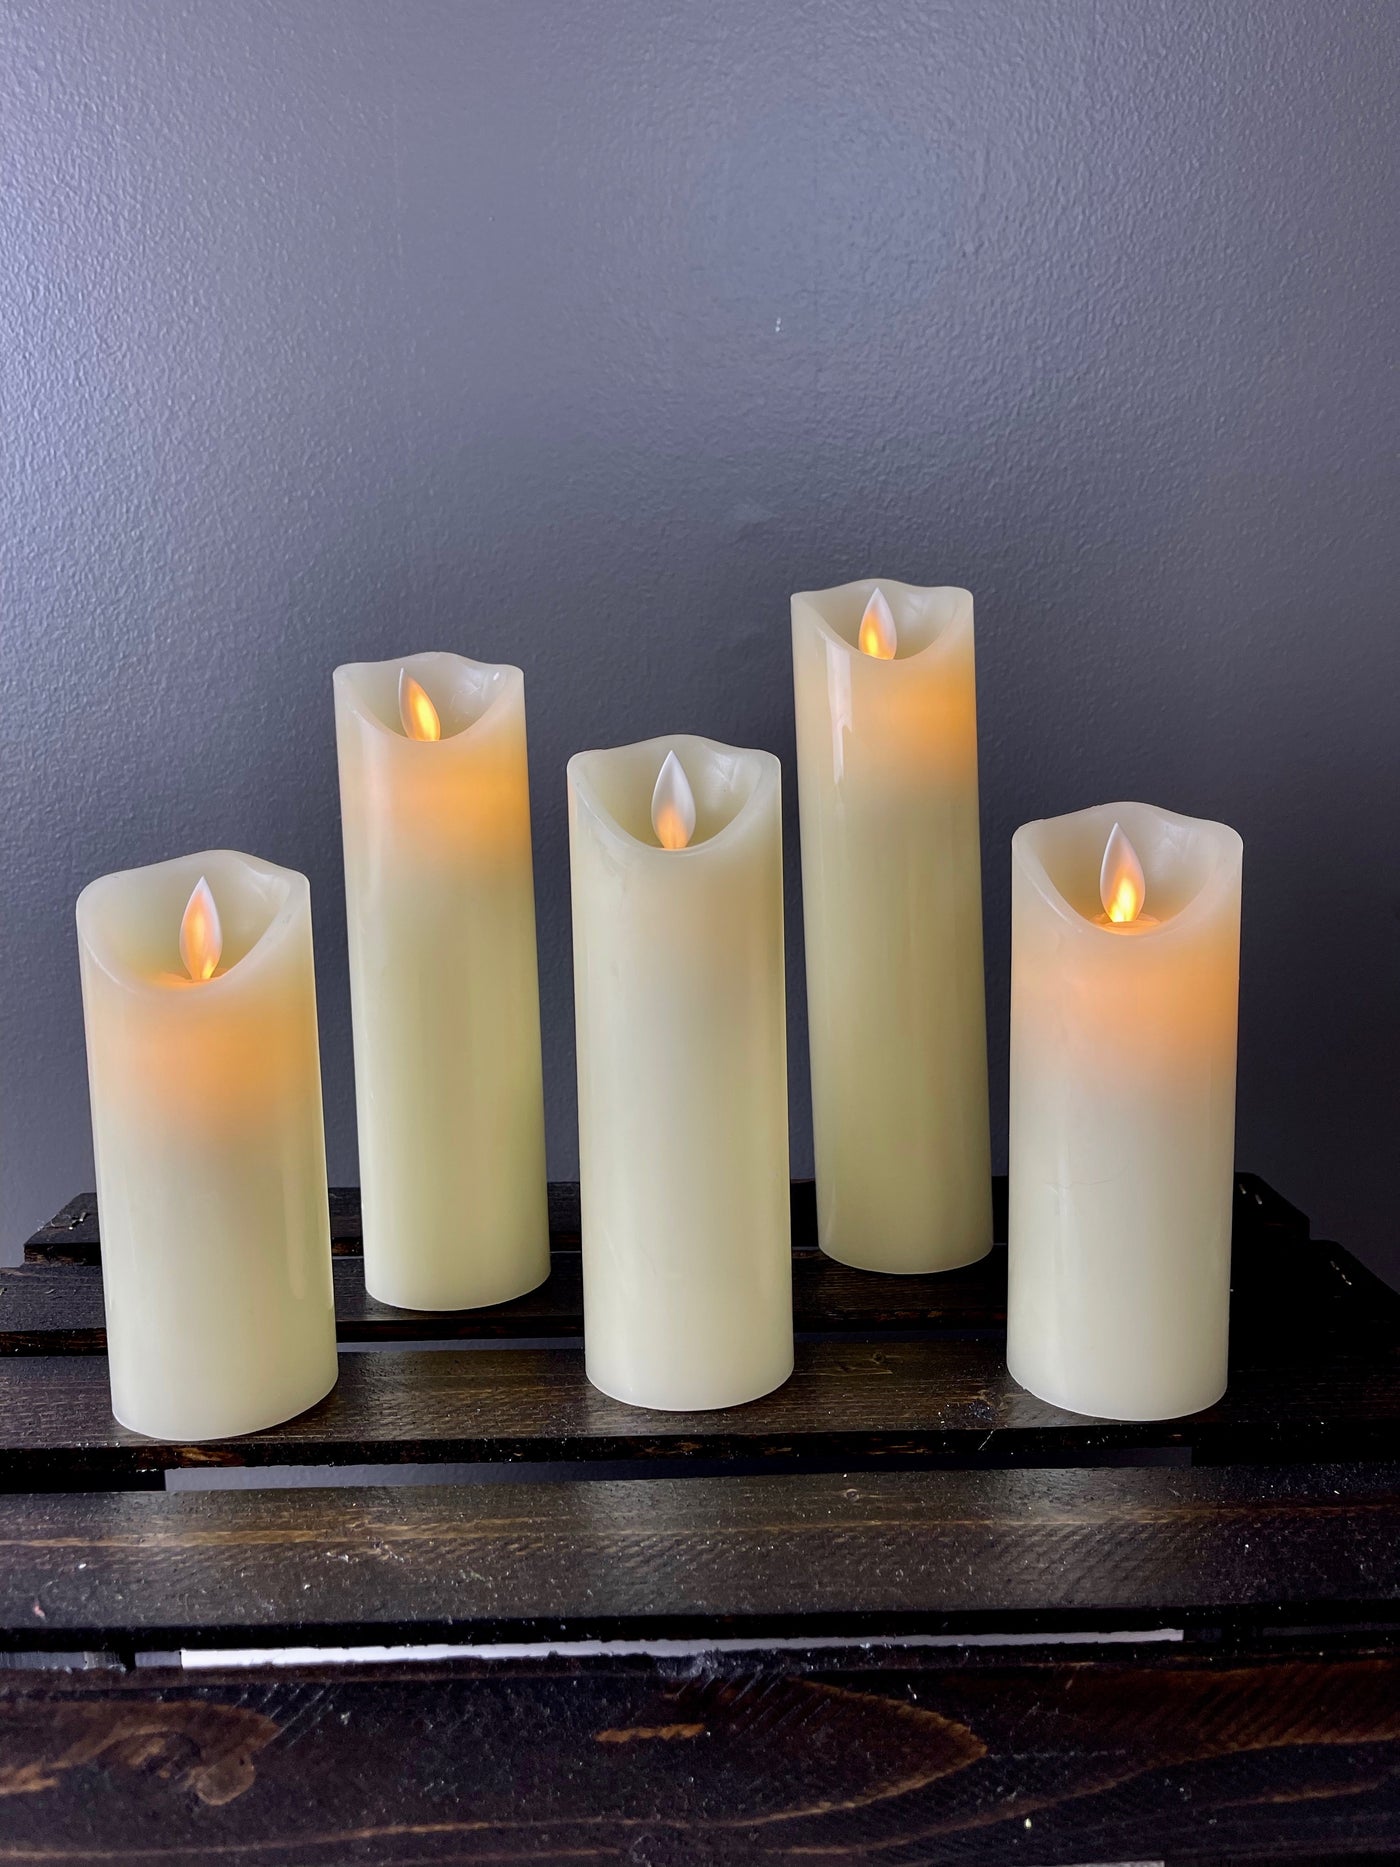 Rent a Rose- LED Candles